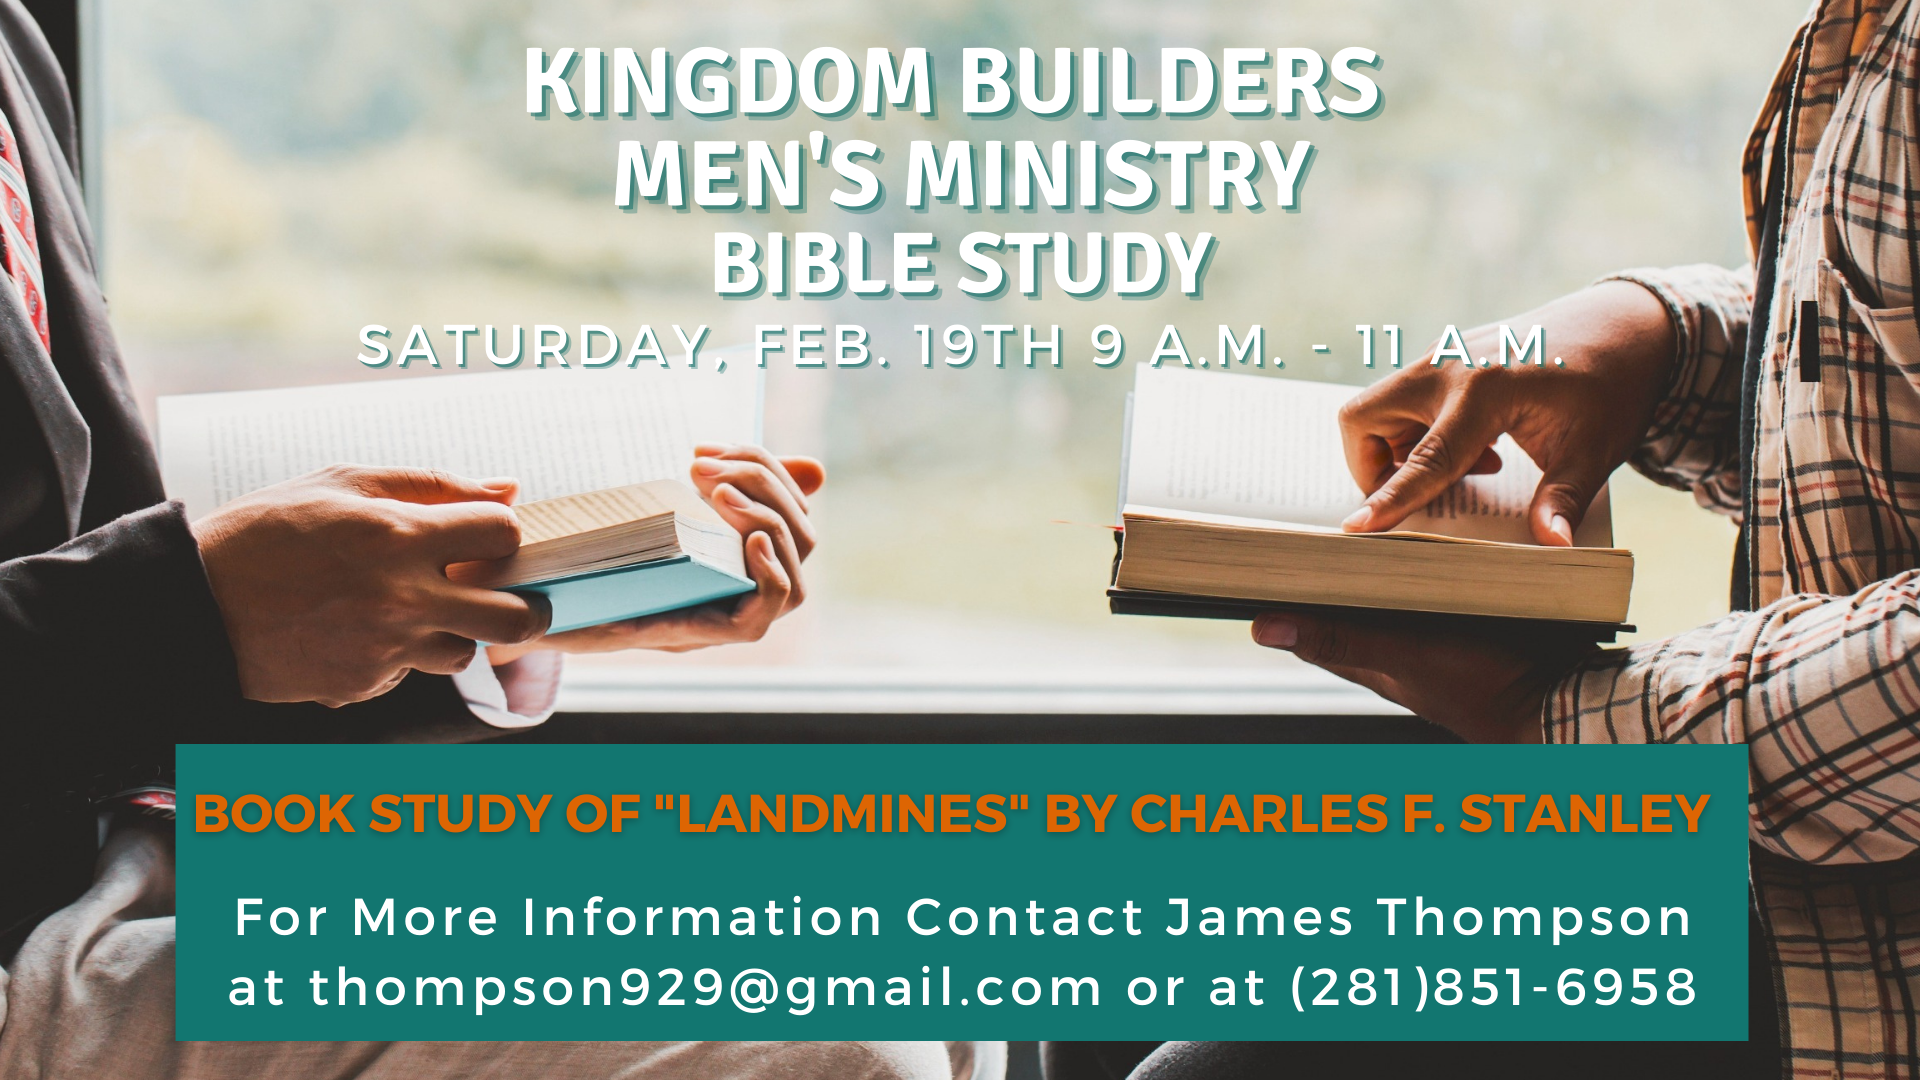 Men’s Ministry Bible Study – Landmines by Charles F. Stanley head image